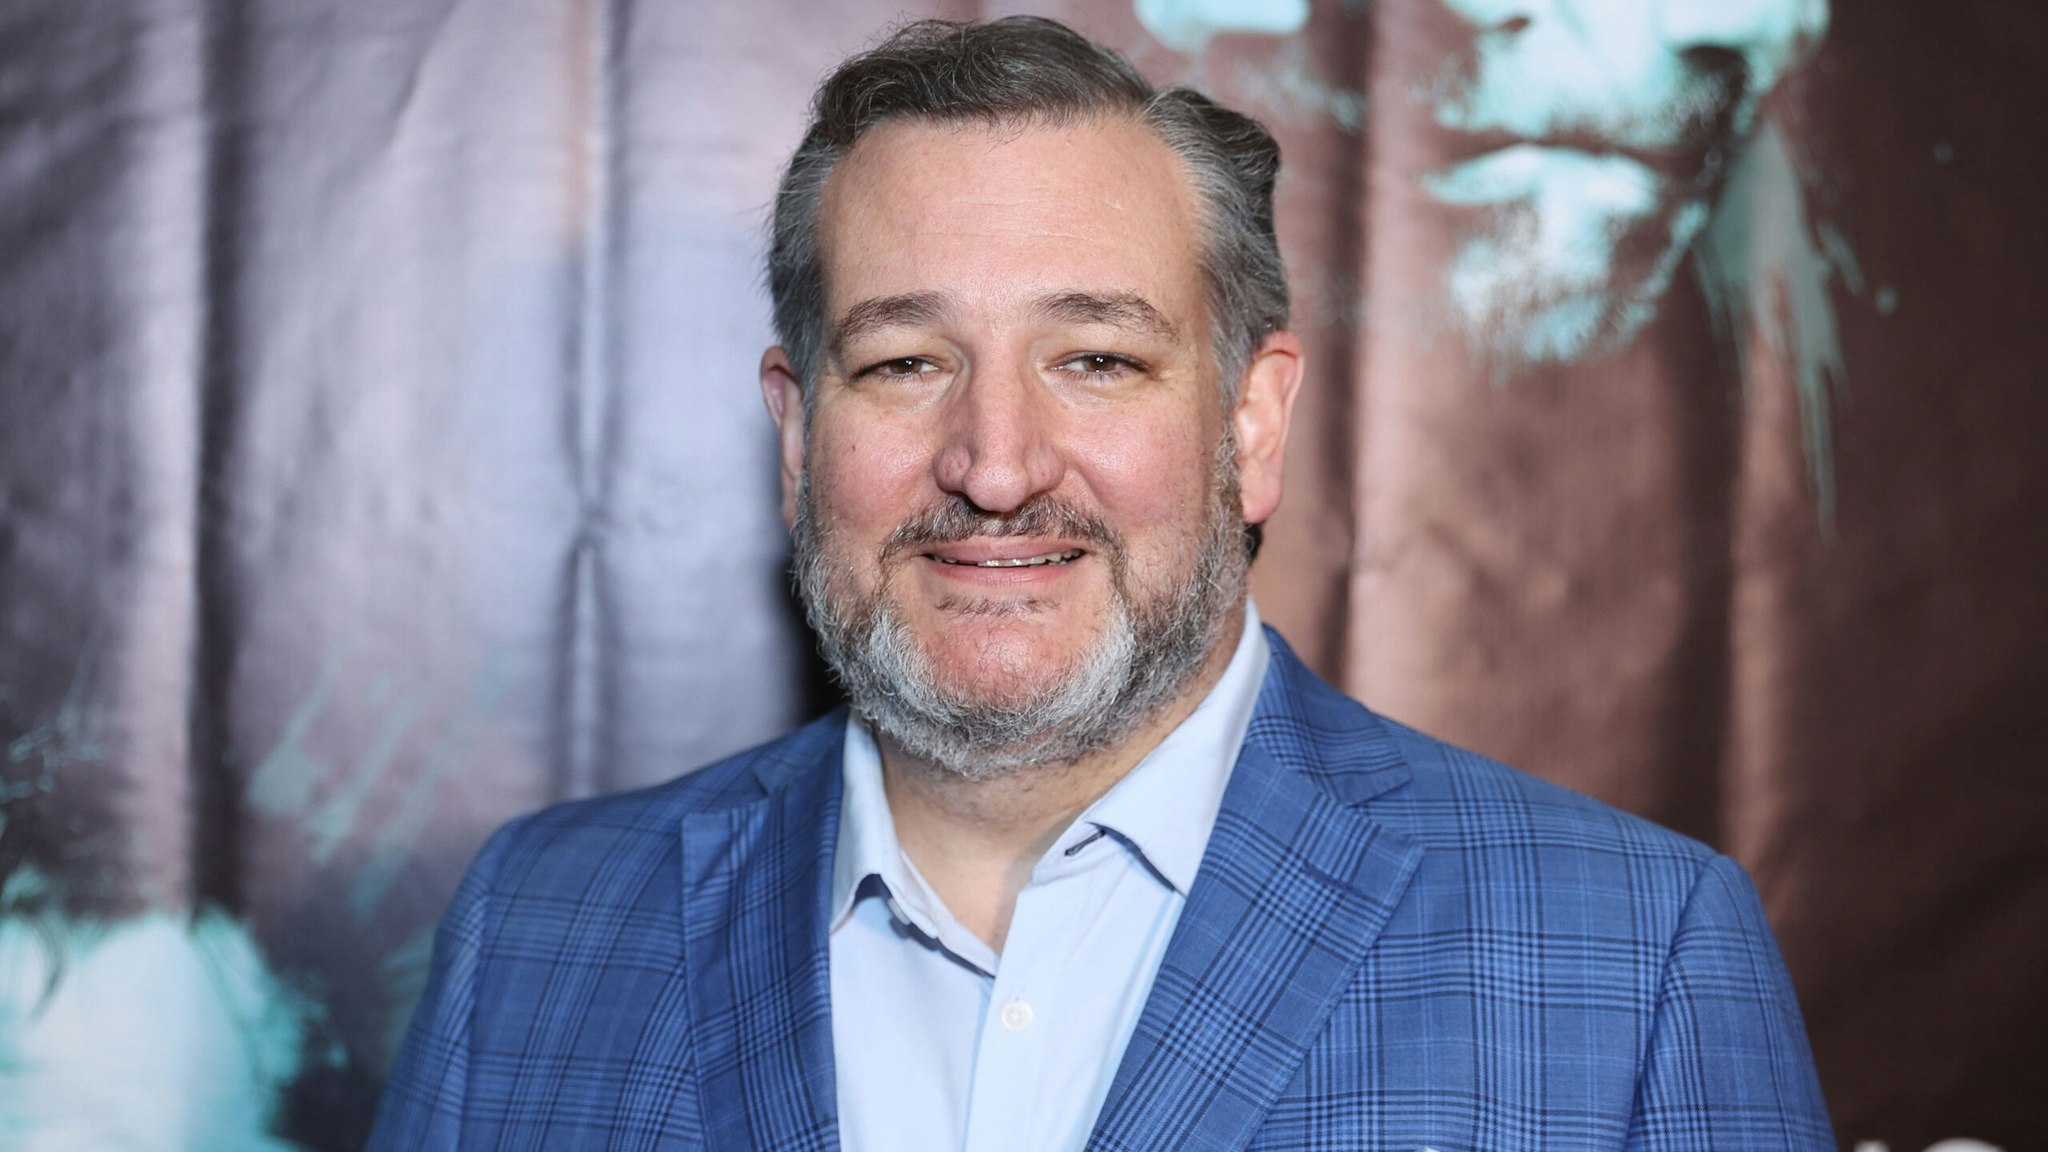 PLANO, TX - APRIL 04: Senator Ted Cruz attends the "Nefarious" red carpet premiere and post-screening at Cinemark West Plano XD and ScreenX on April 4, 2023 in Plano, Texas.